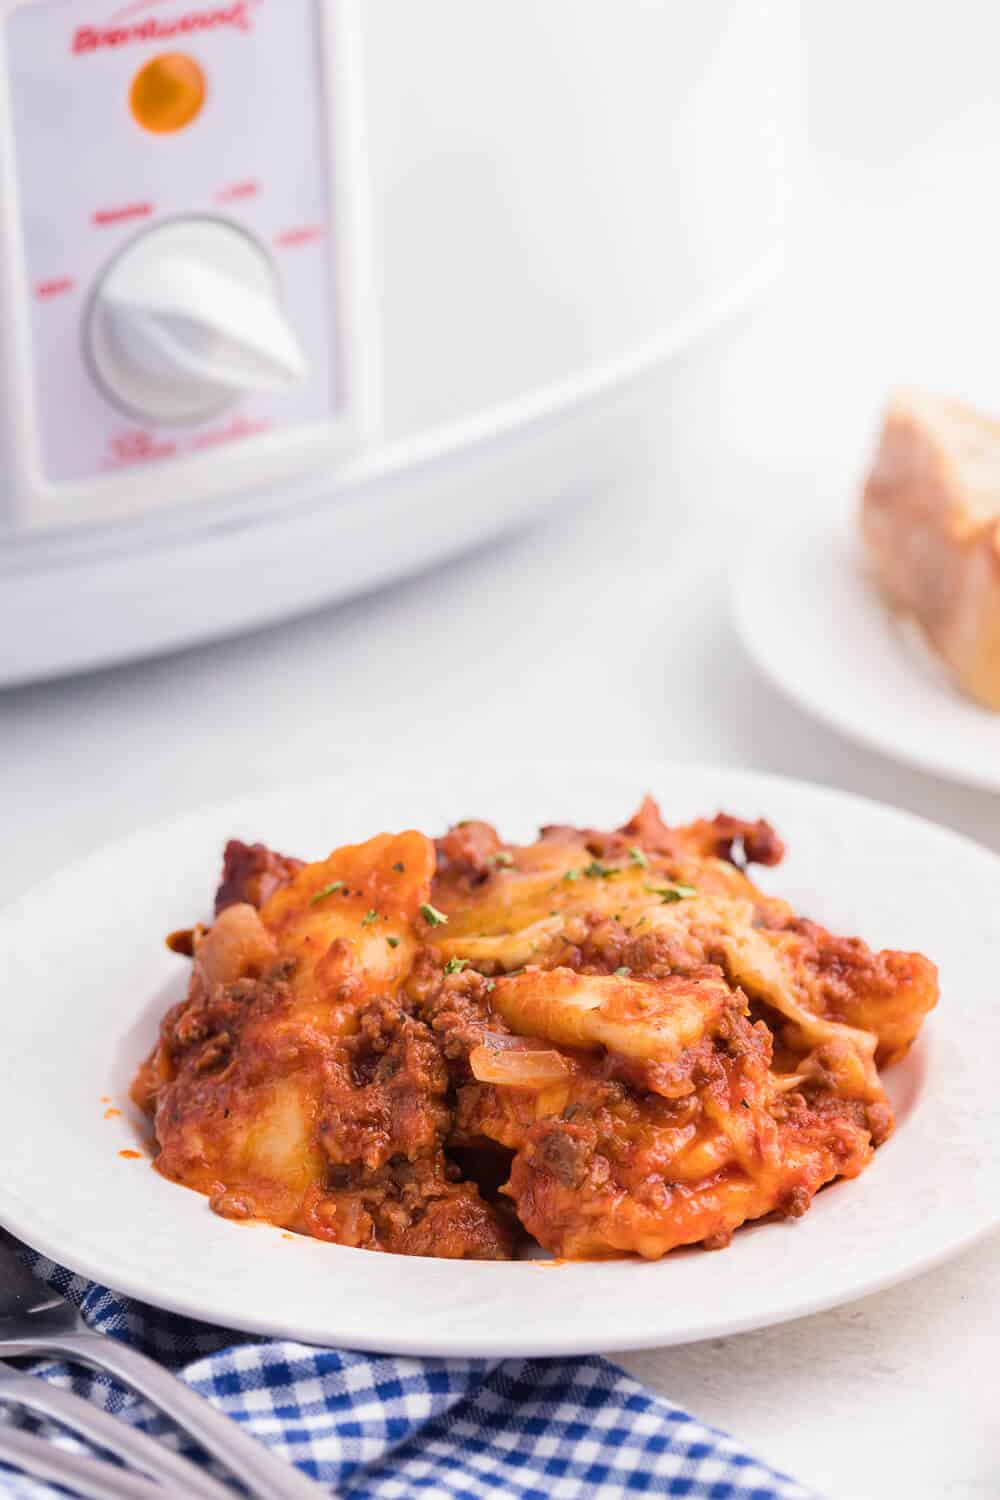 Slow Cooker Ravioli Lasagna - This Lazy Lasagna is a super easy Crockpot recipe made with frozen ravioli, homemade tomato sauce with beef and loads of cheese. You'll love all the cheesy, hearty layers. Plus, it's freezer friendly!